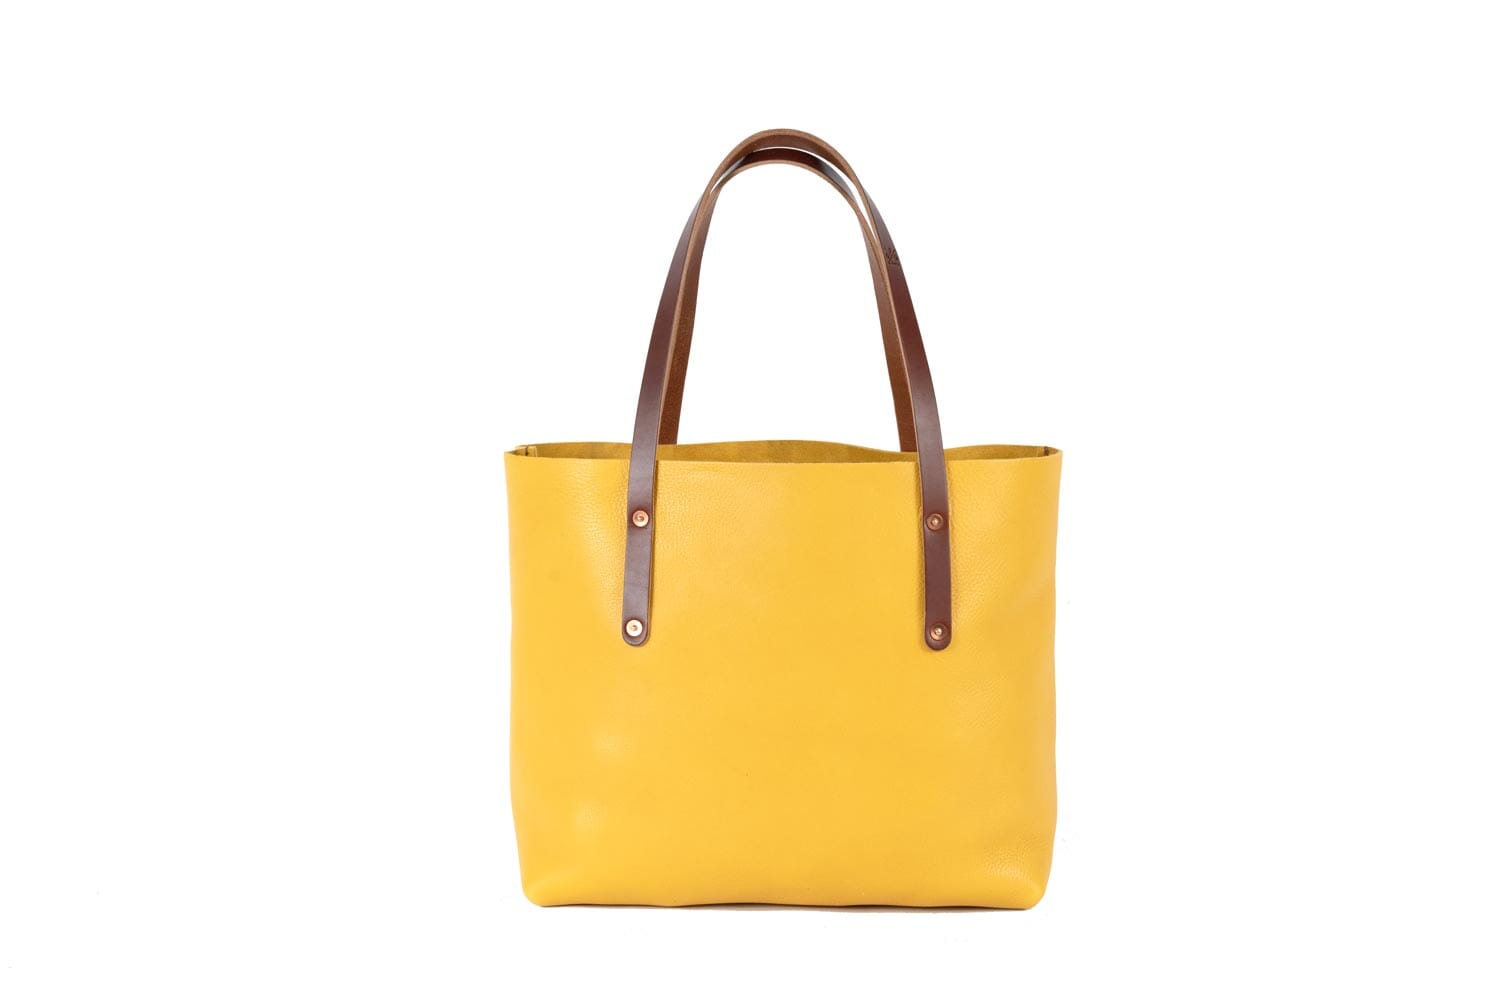 AVERY LEATHER TOTE BAG - LARGE - GOLDEN SUN